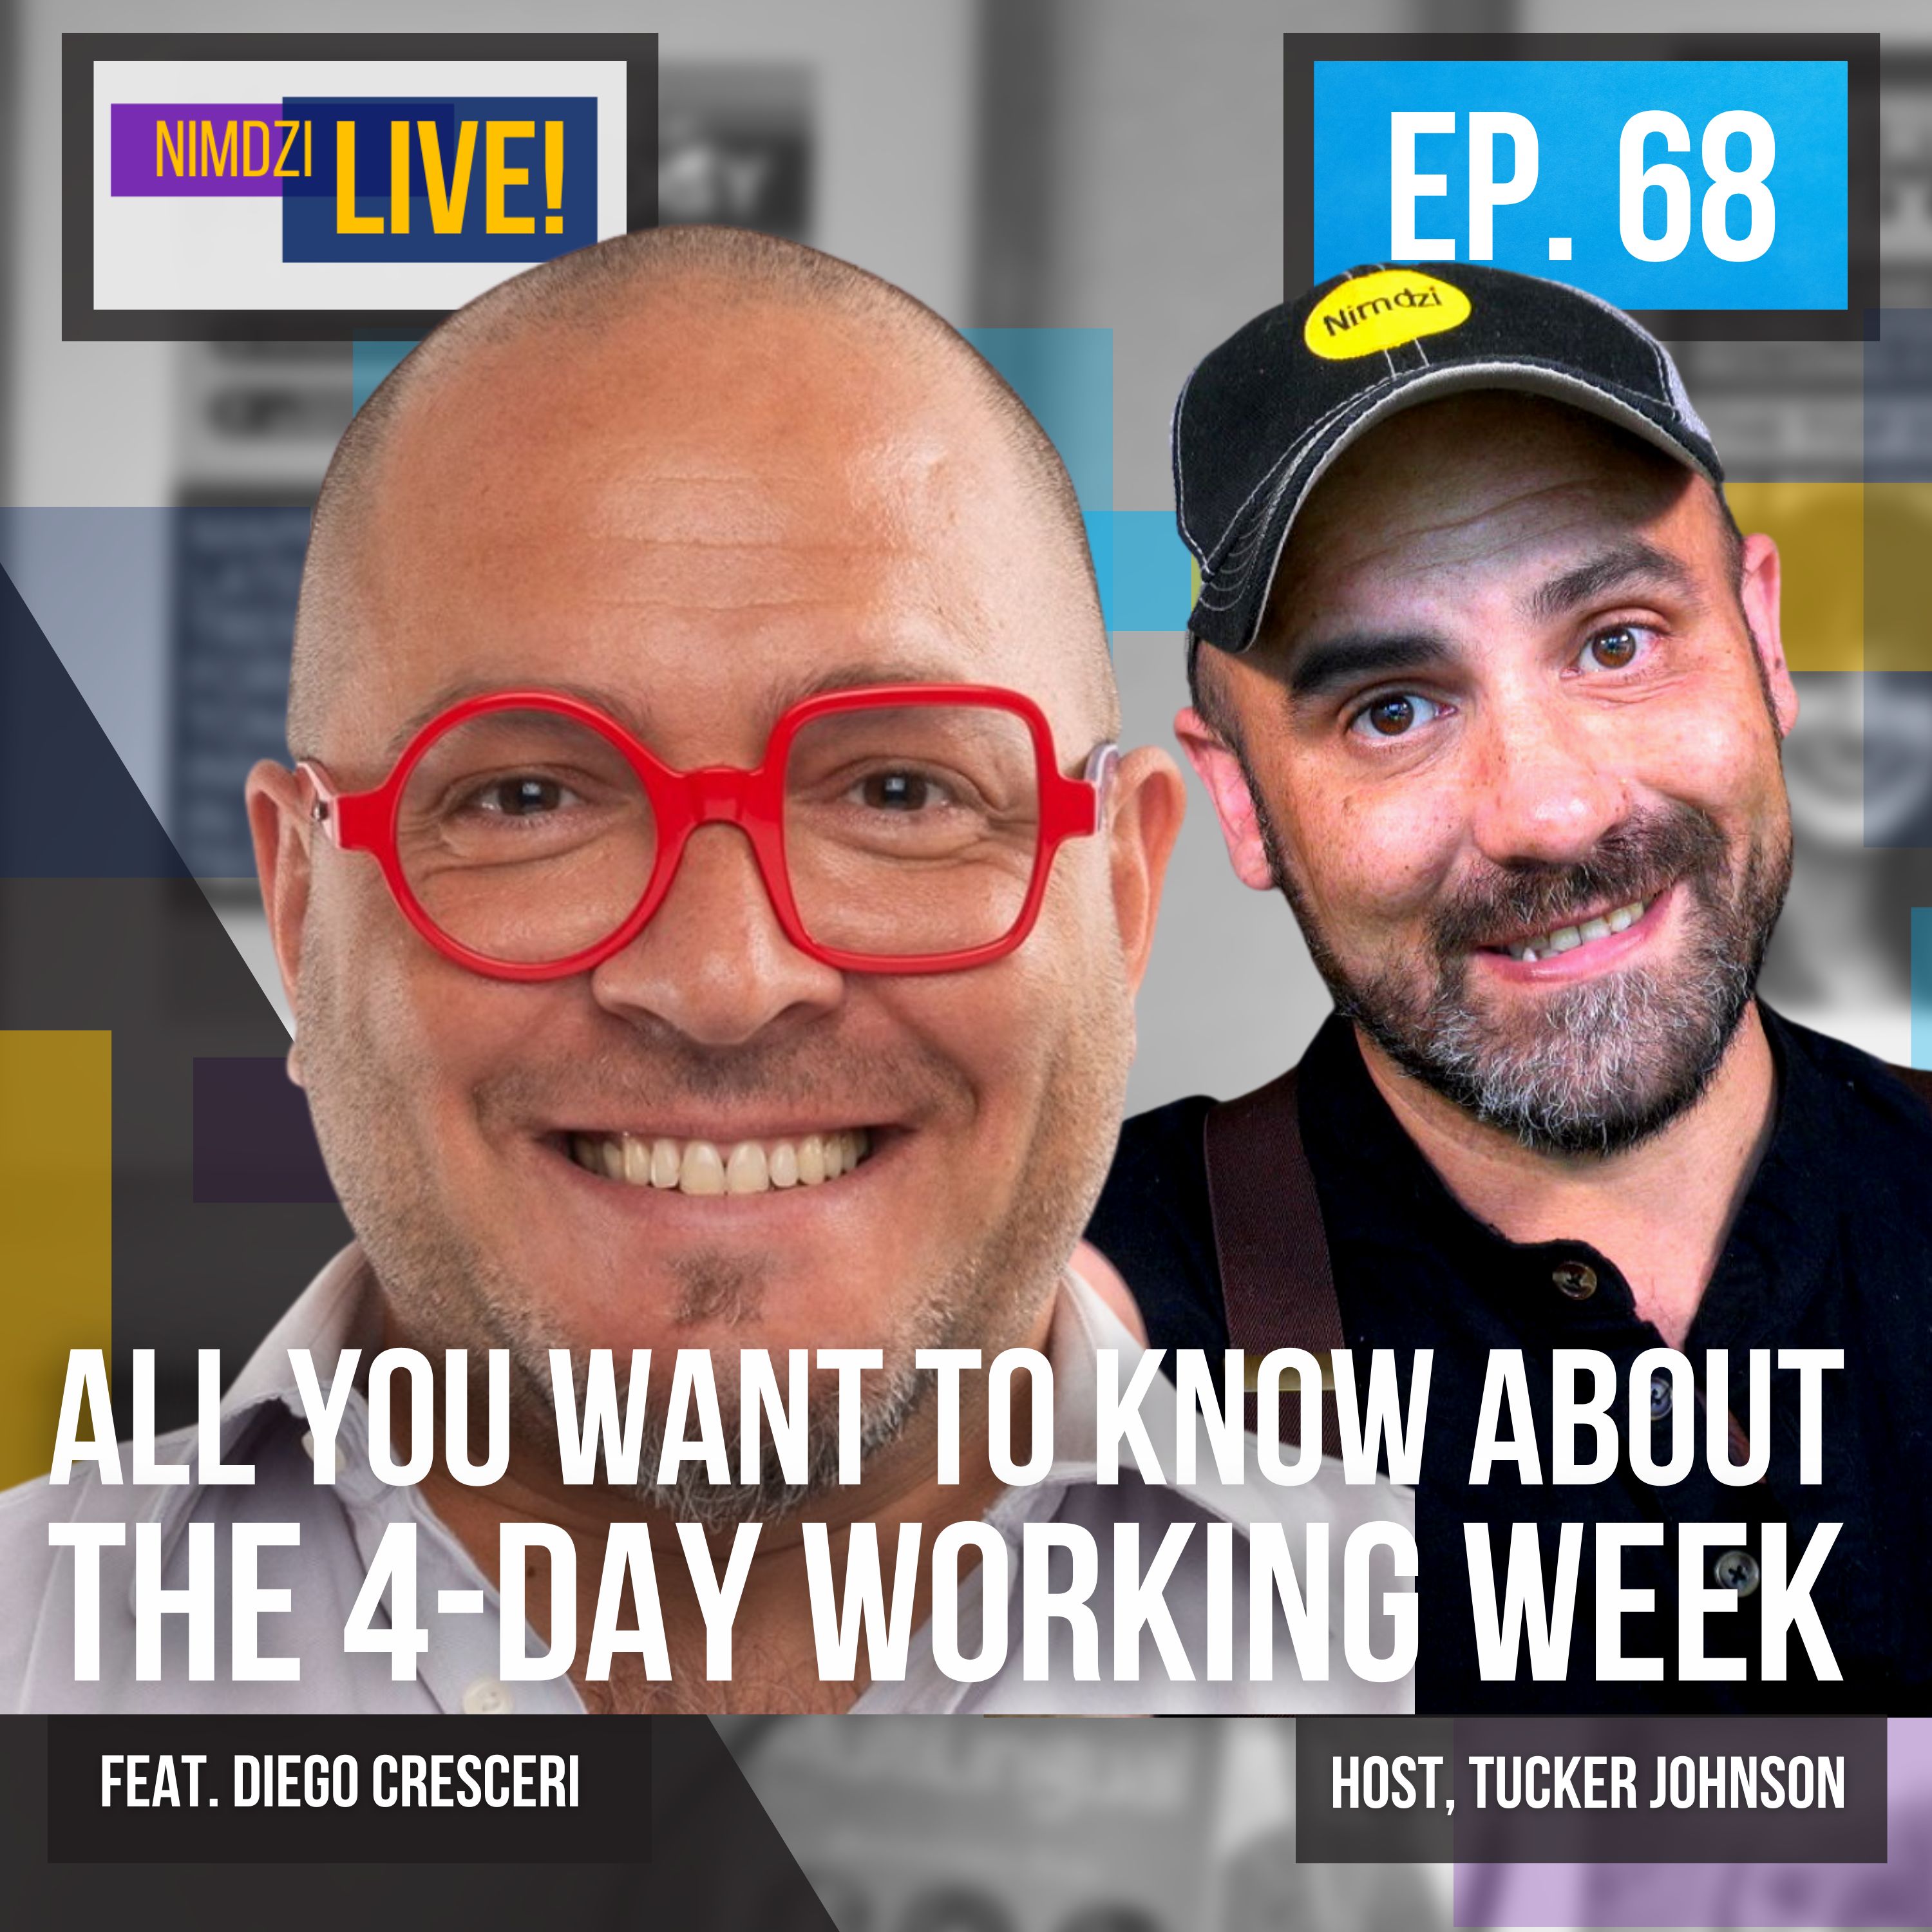 All you Want to Know About the 4-Day Working Week (feat. Diego Cresceri)